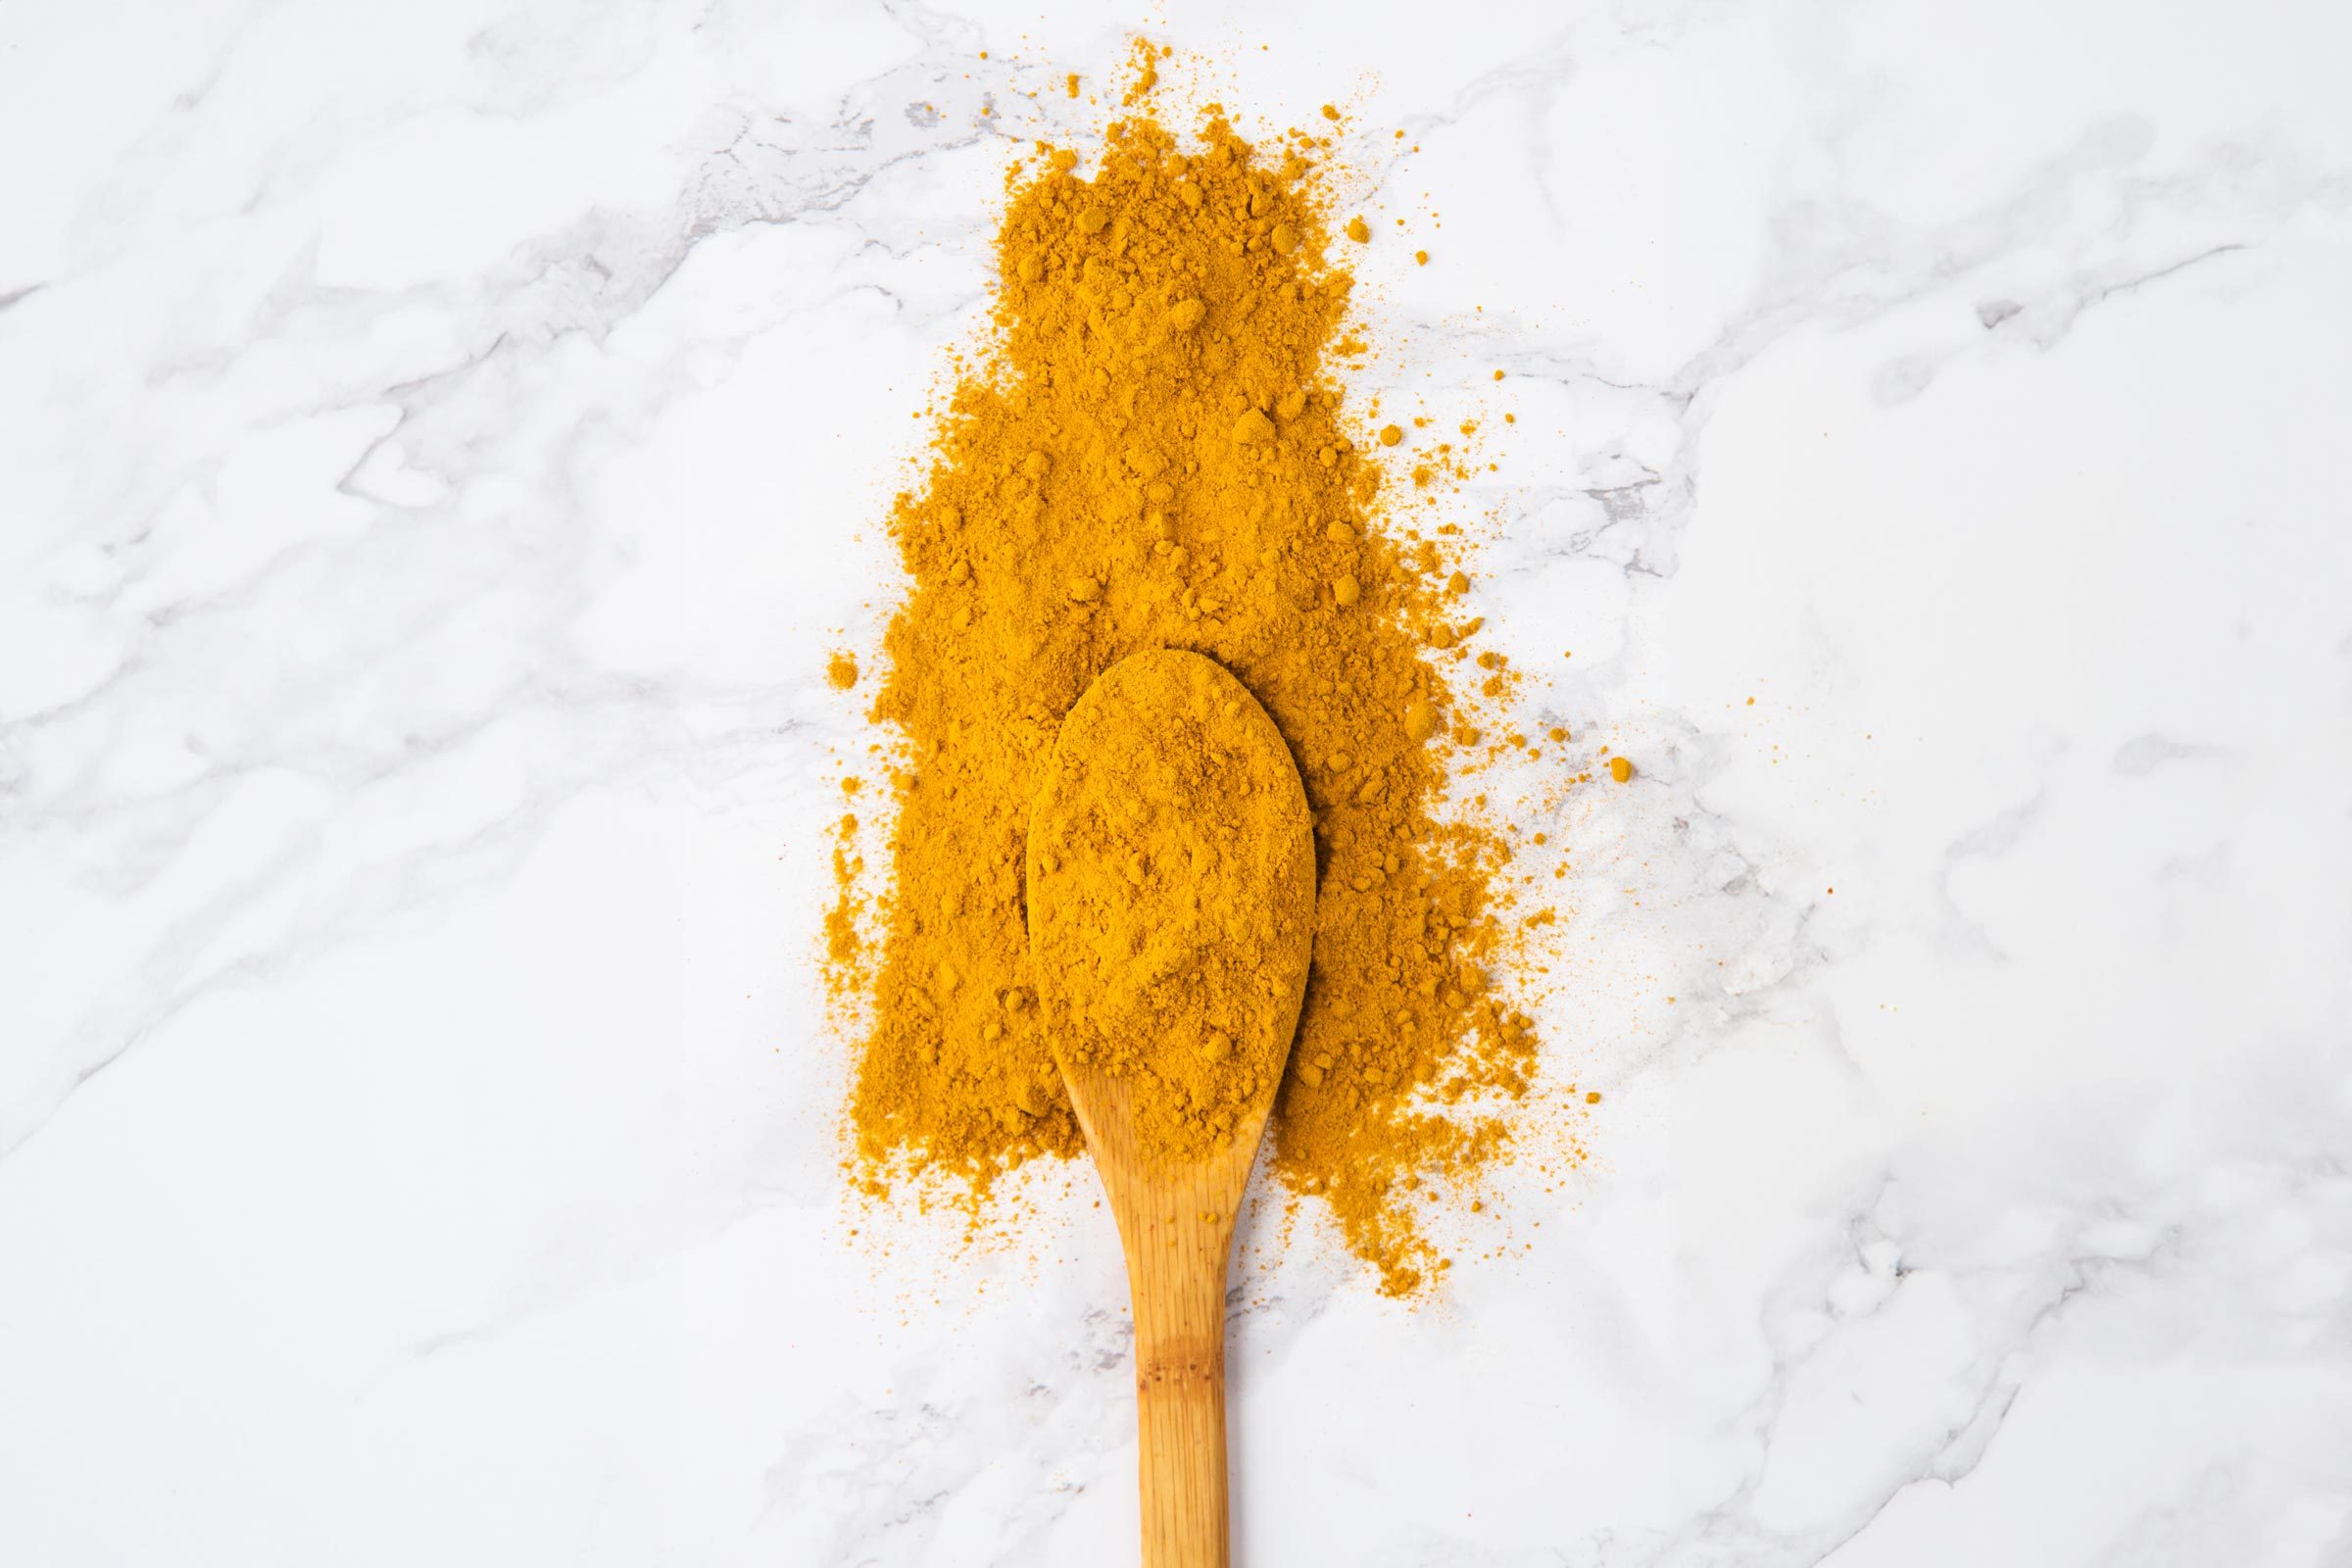 How to Remove Turmeric Stains from Clothes, Counters, Dishes and More